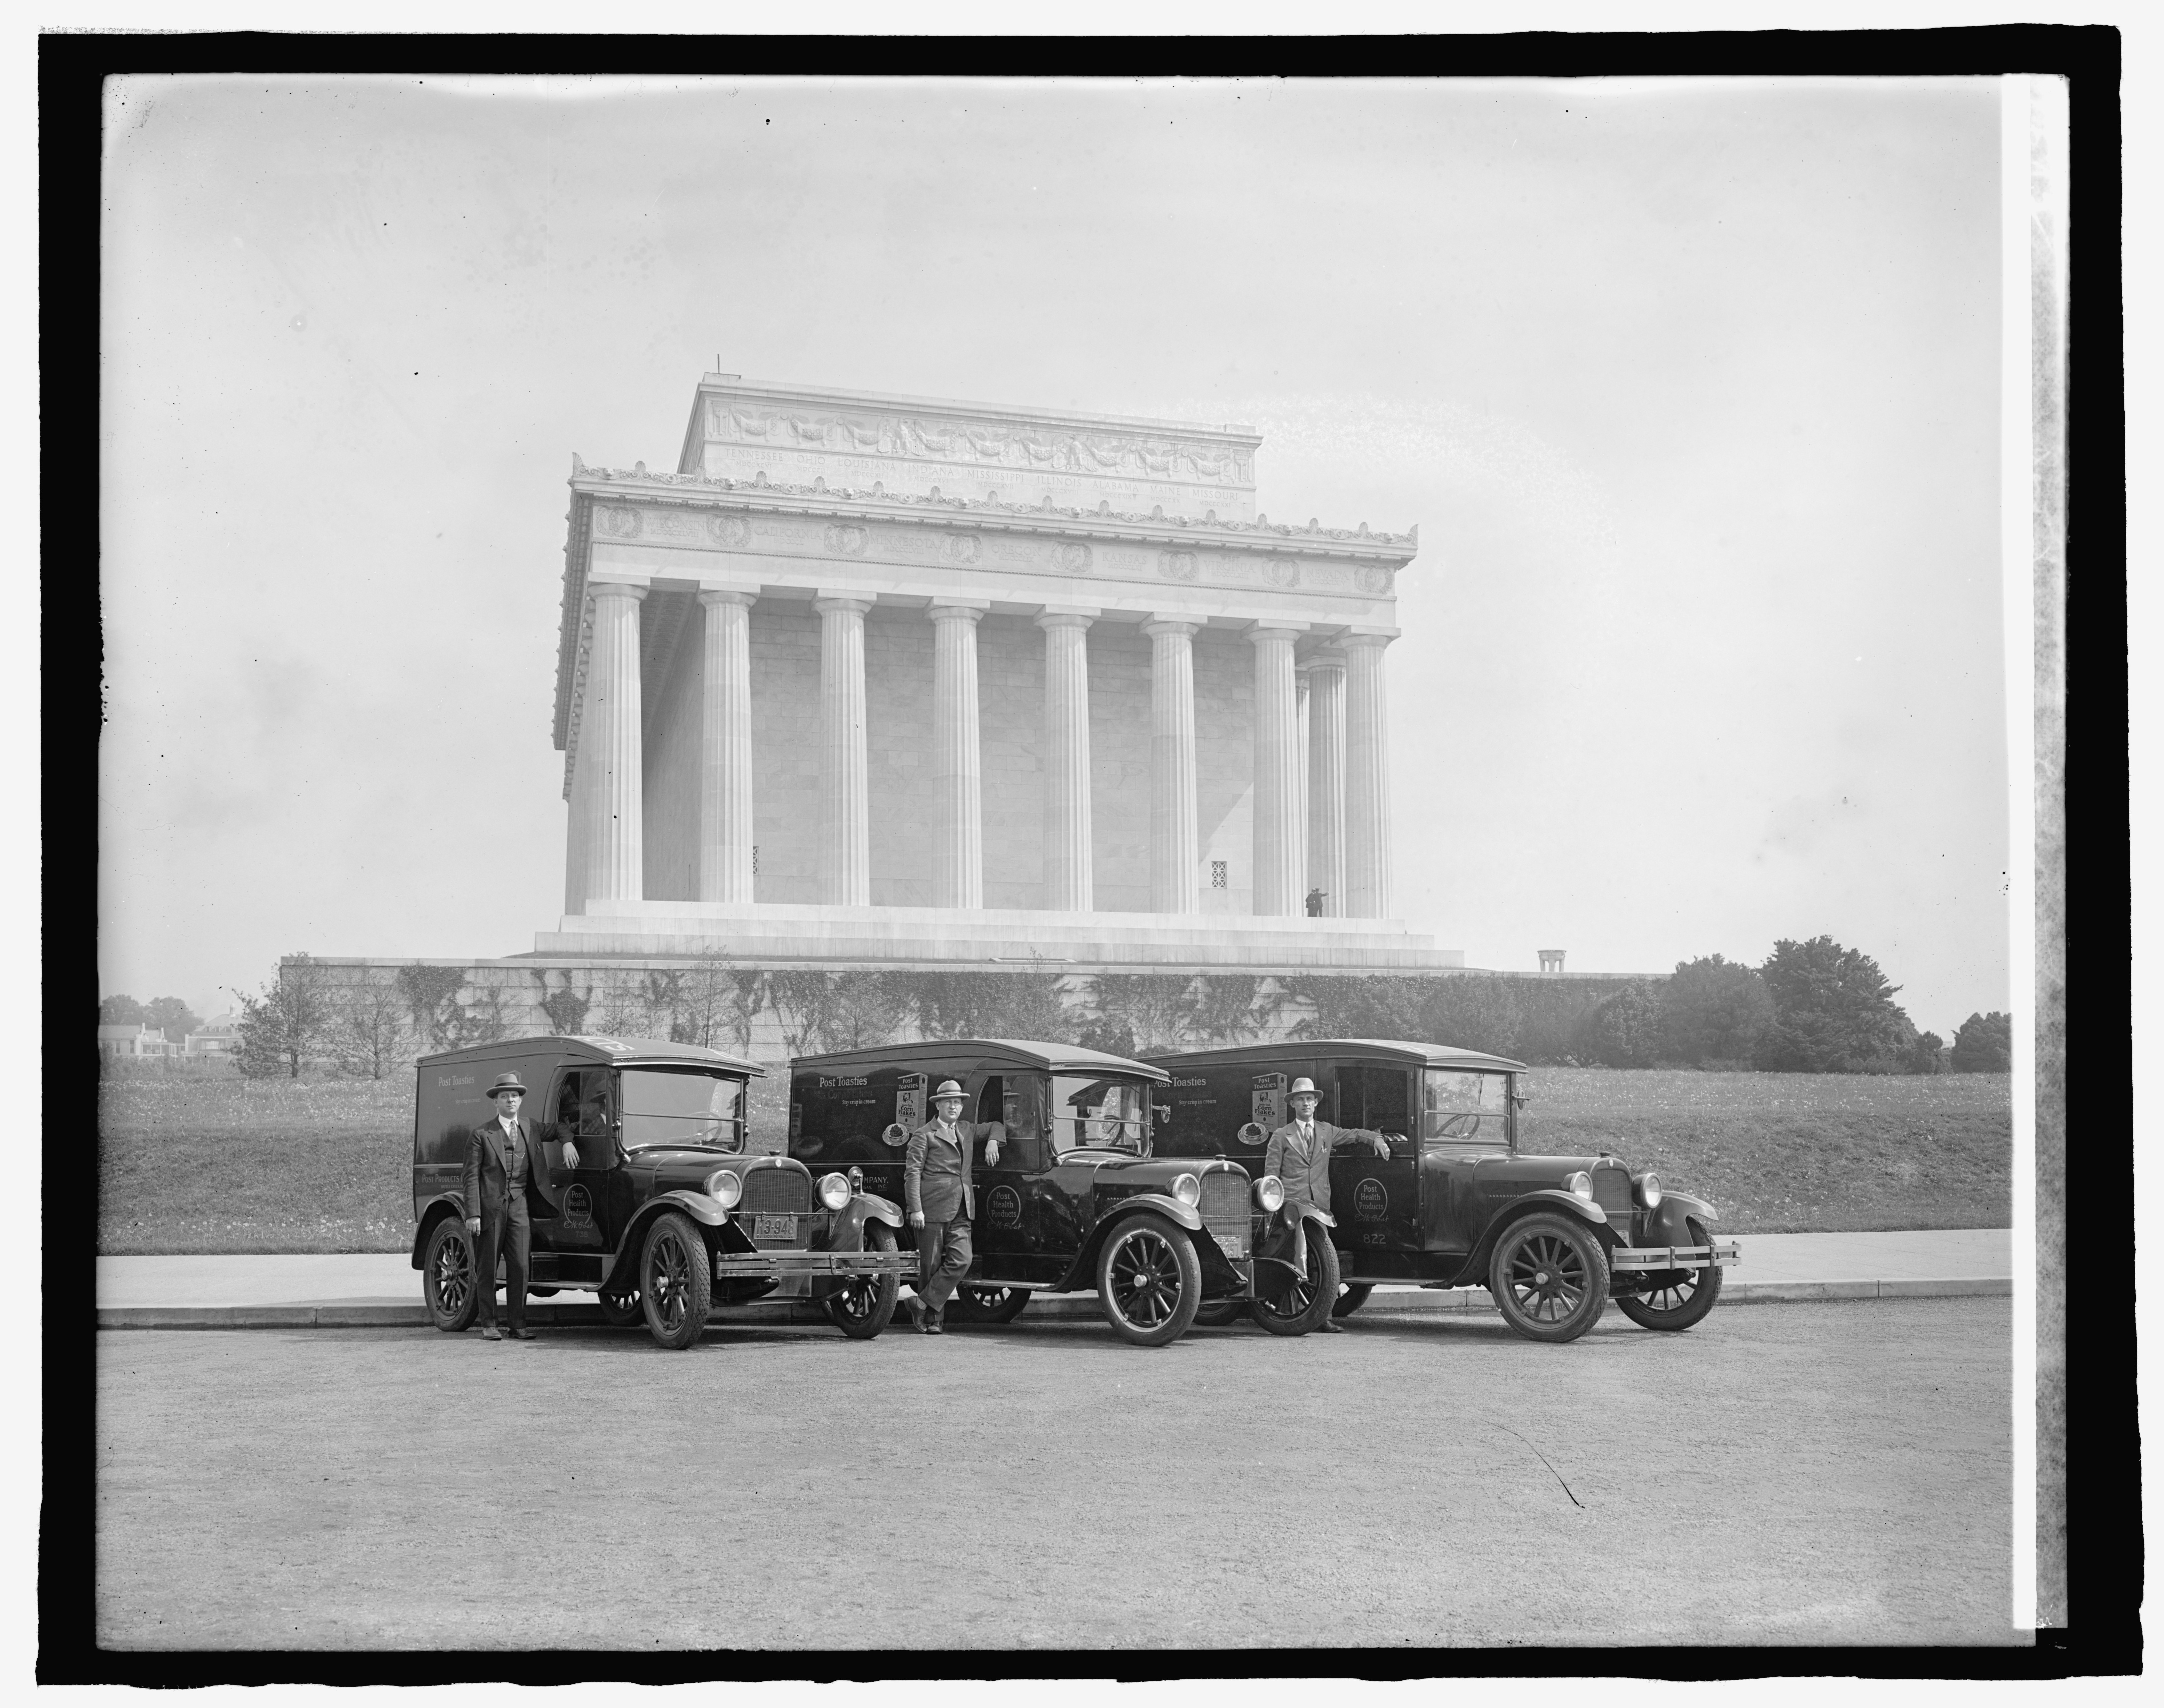 Post Products Co., (Lincoln Memorial, Washington, D.C.) LCCN2016825939 - Title: Post Products Co., [Lincoln Memorial, Washington, D.C.]
Abstract/medium: 1 negative : glass ; 8 x 10 in. or smaller